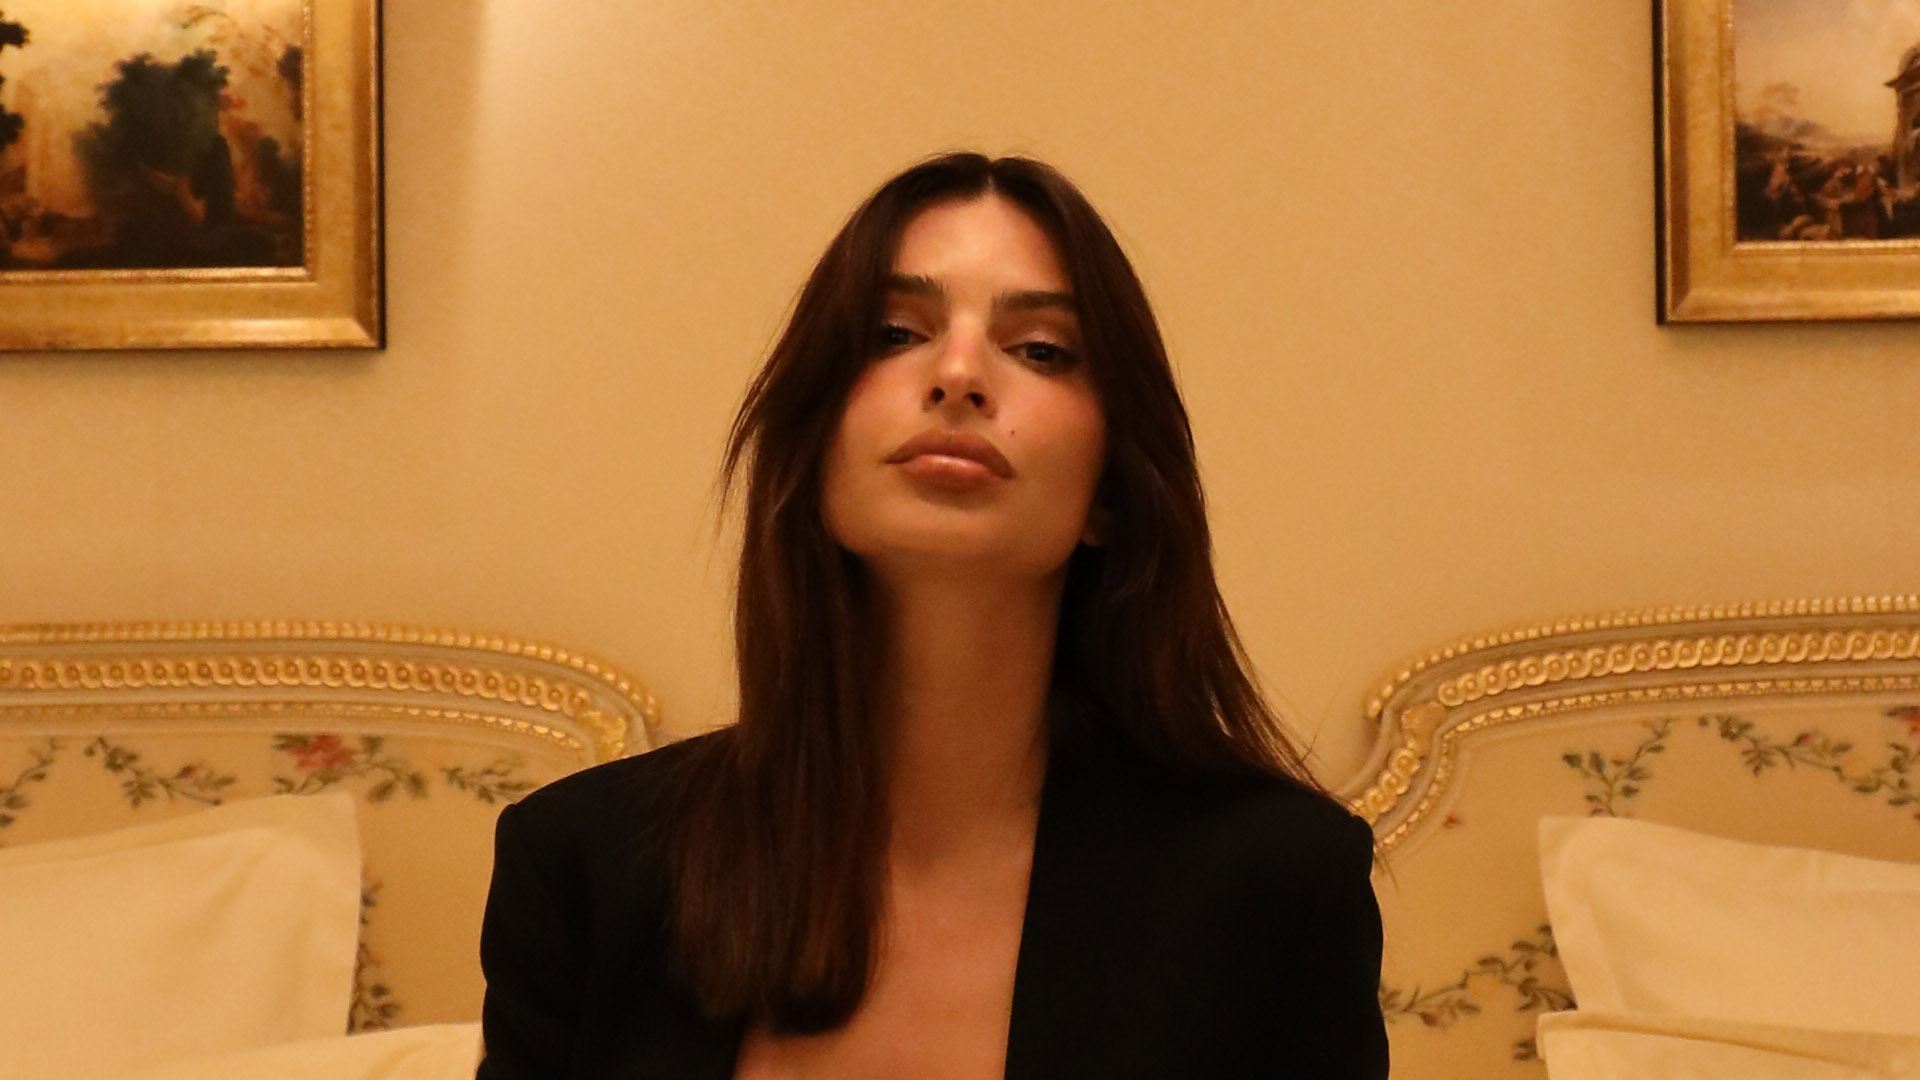 Emily Ratajkowski rocks plunging pantsuit on bed in luxury Paris hotel as she takes on fashion week in City of Lights